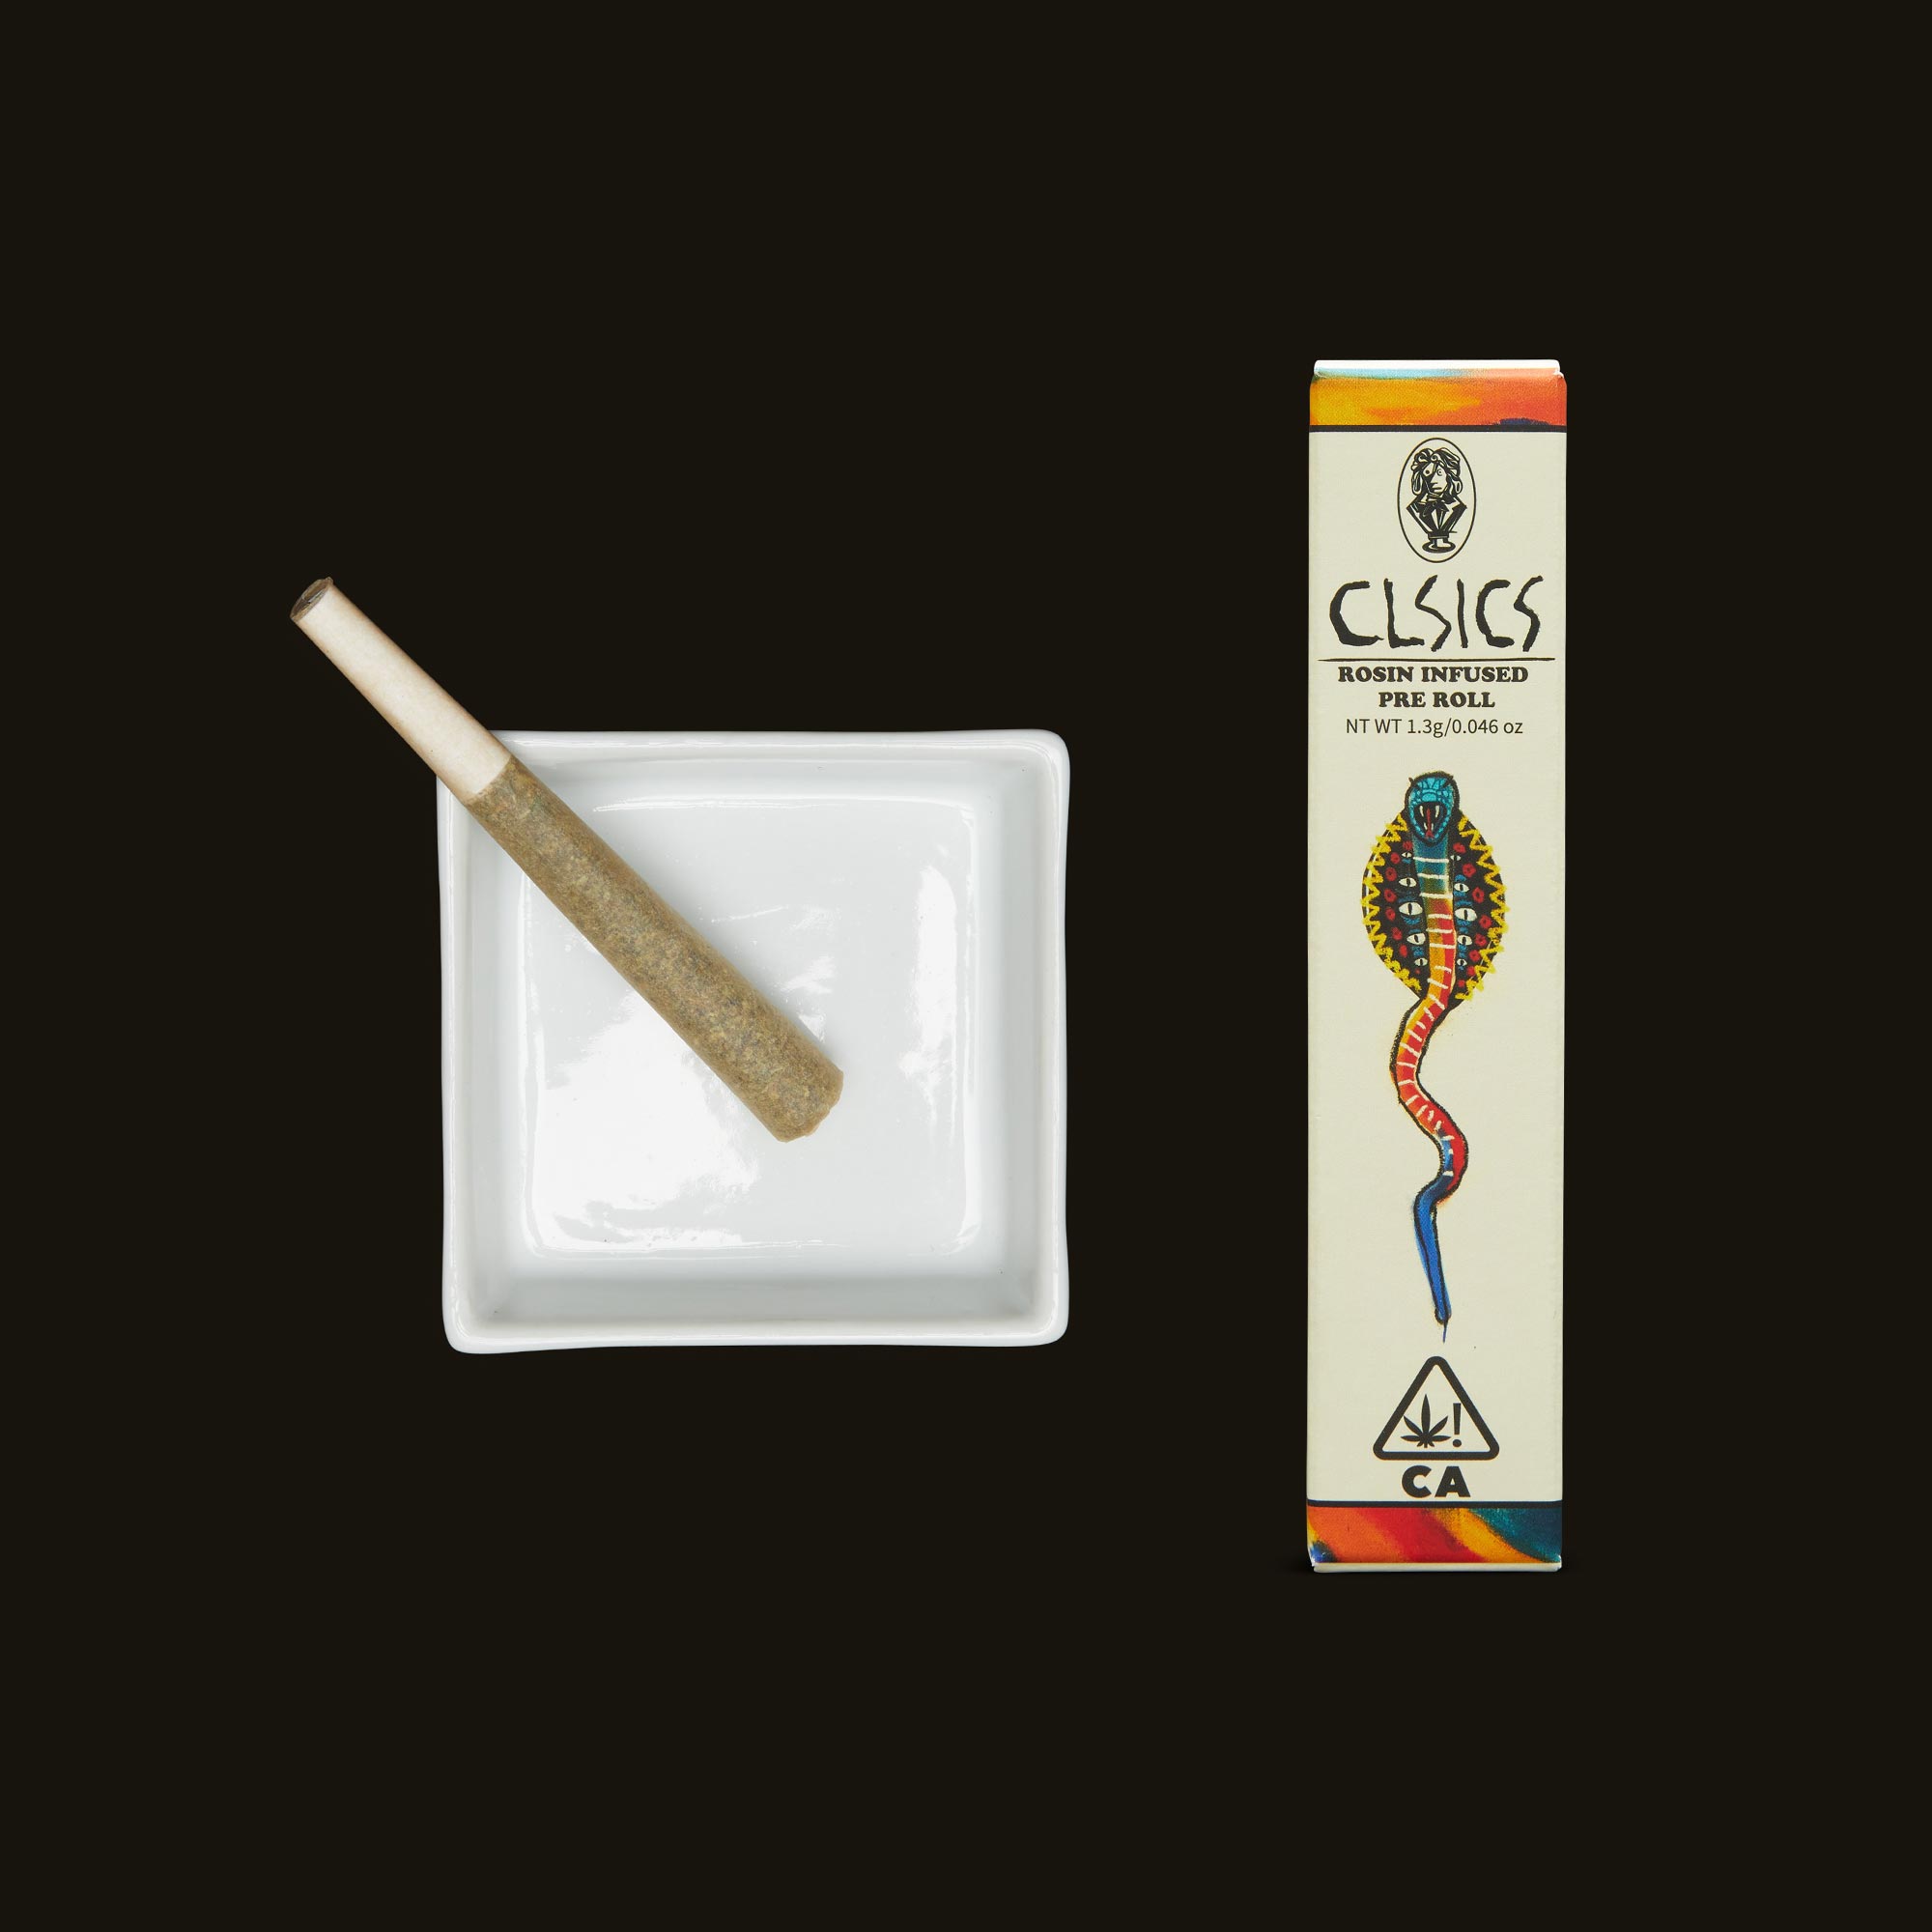 CLSICS-Rosin-Infused-Pre-Roll-1.3g2678-2123049